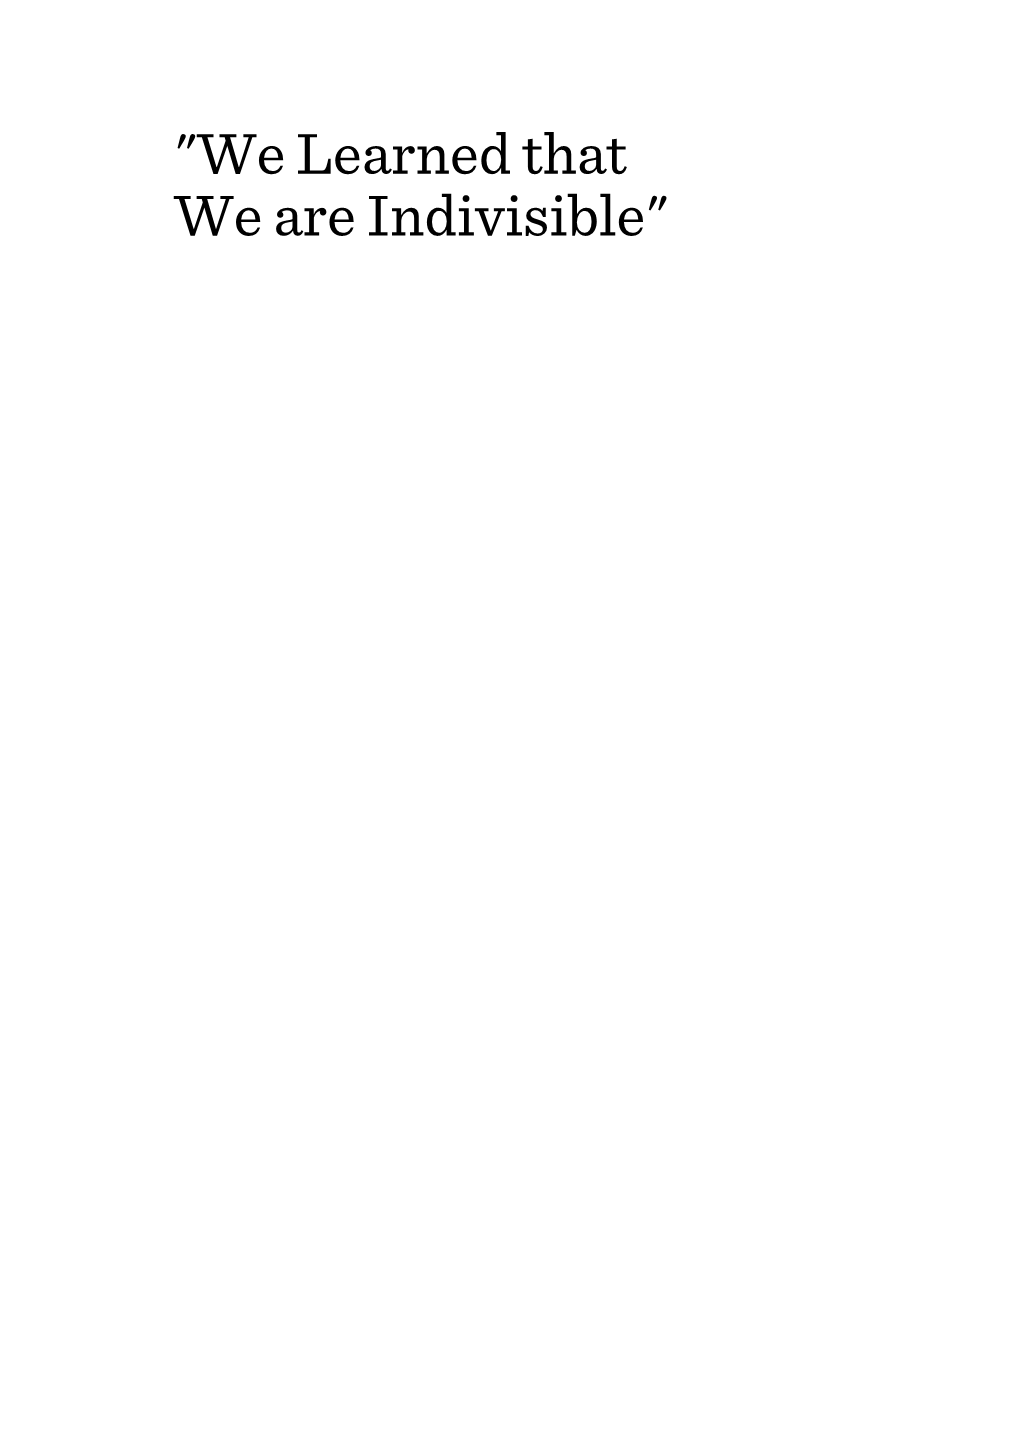 "We Learned That We Are Indivisible"